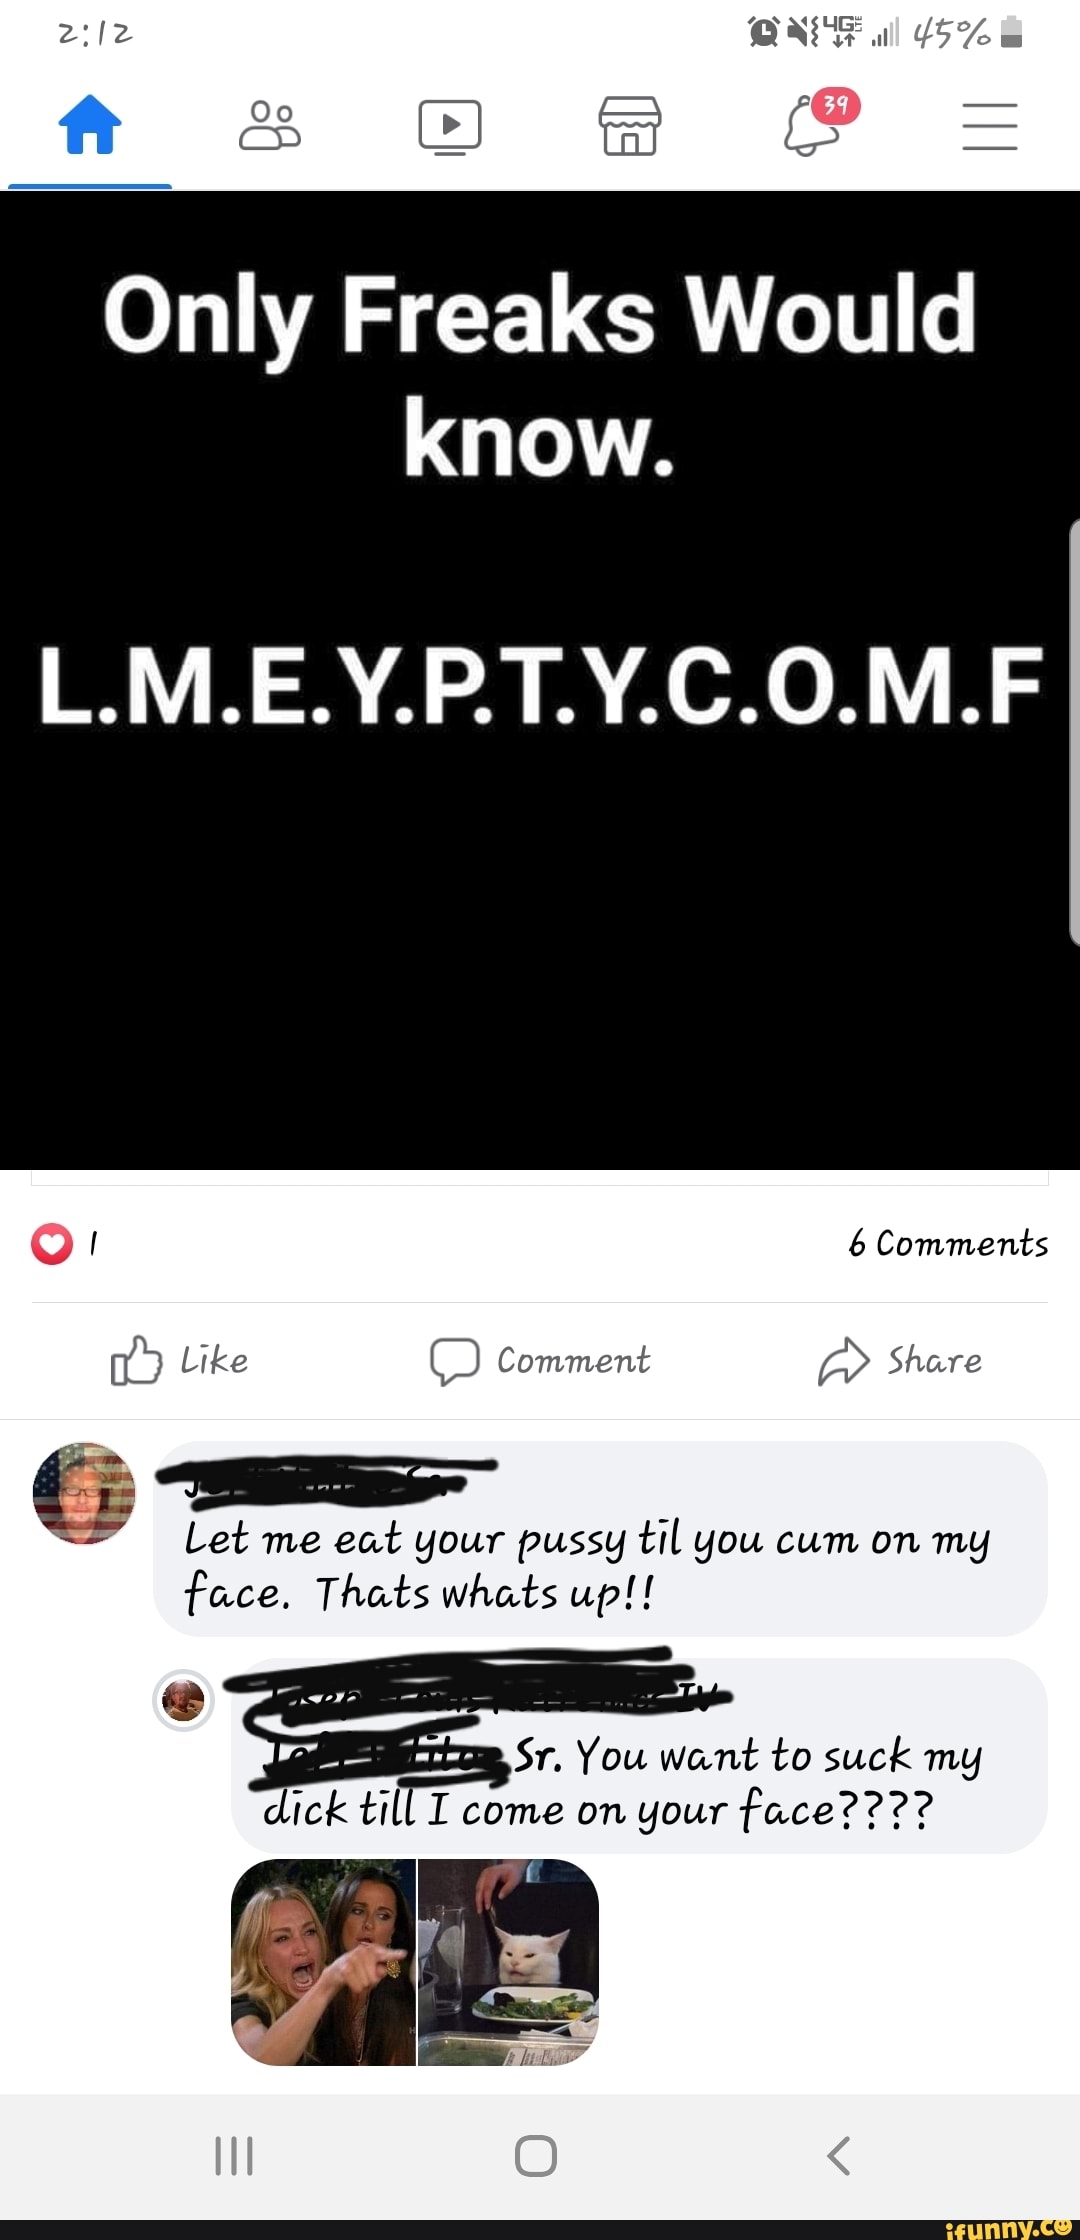 L.M.E.Y.P.T.Y.C.O.M.F Let me eat your pussy til you cum on mg face. 